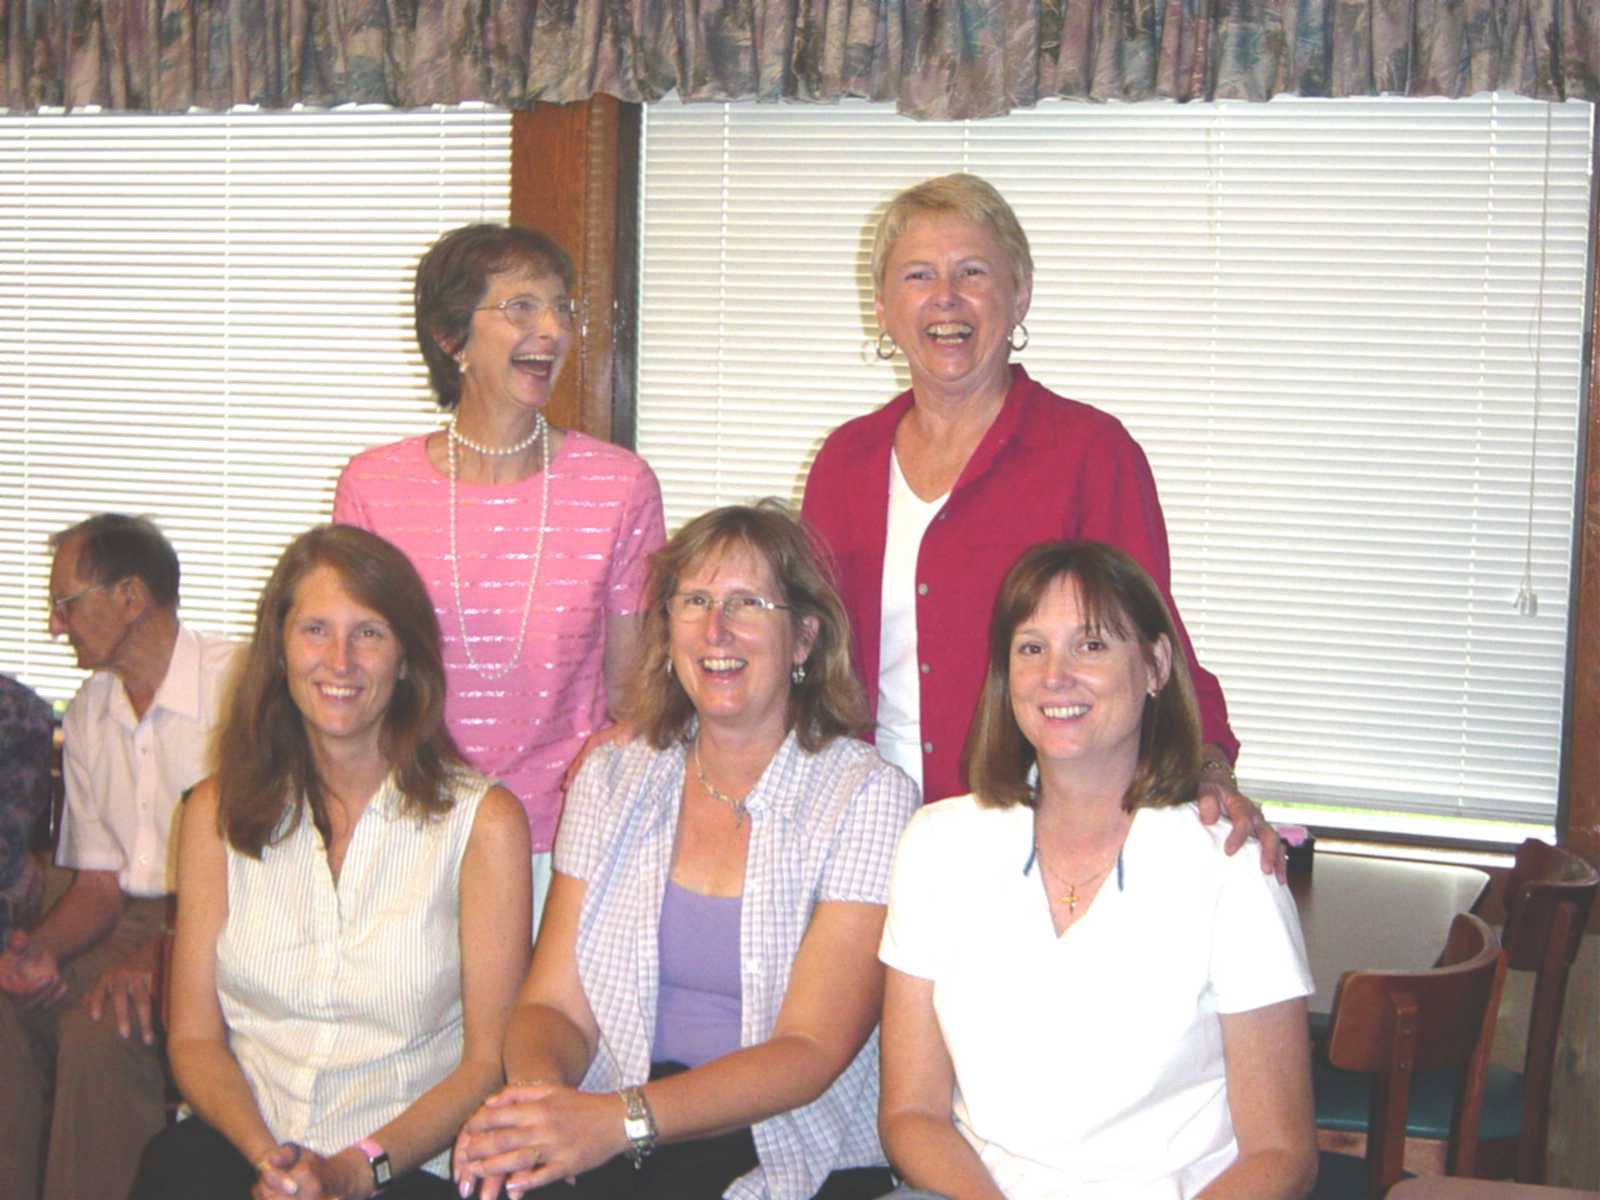 Christine, Diana and Debbie with moms Betty and Kay